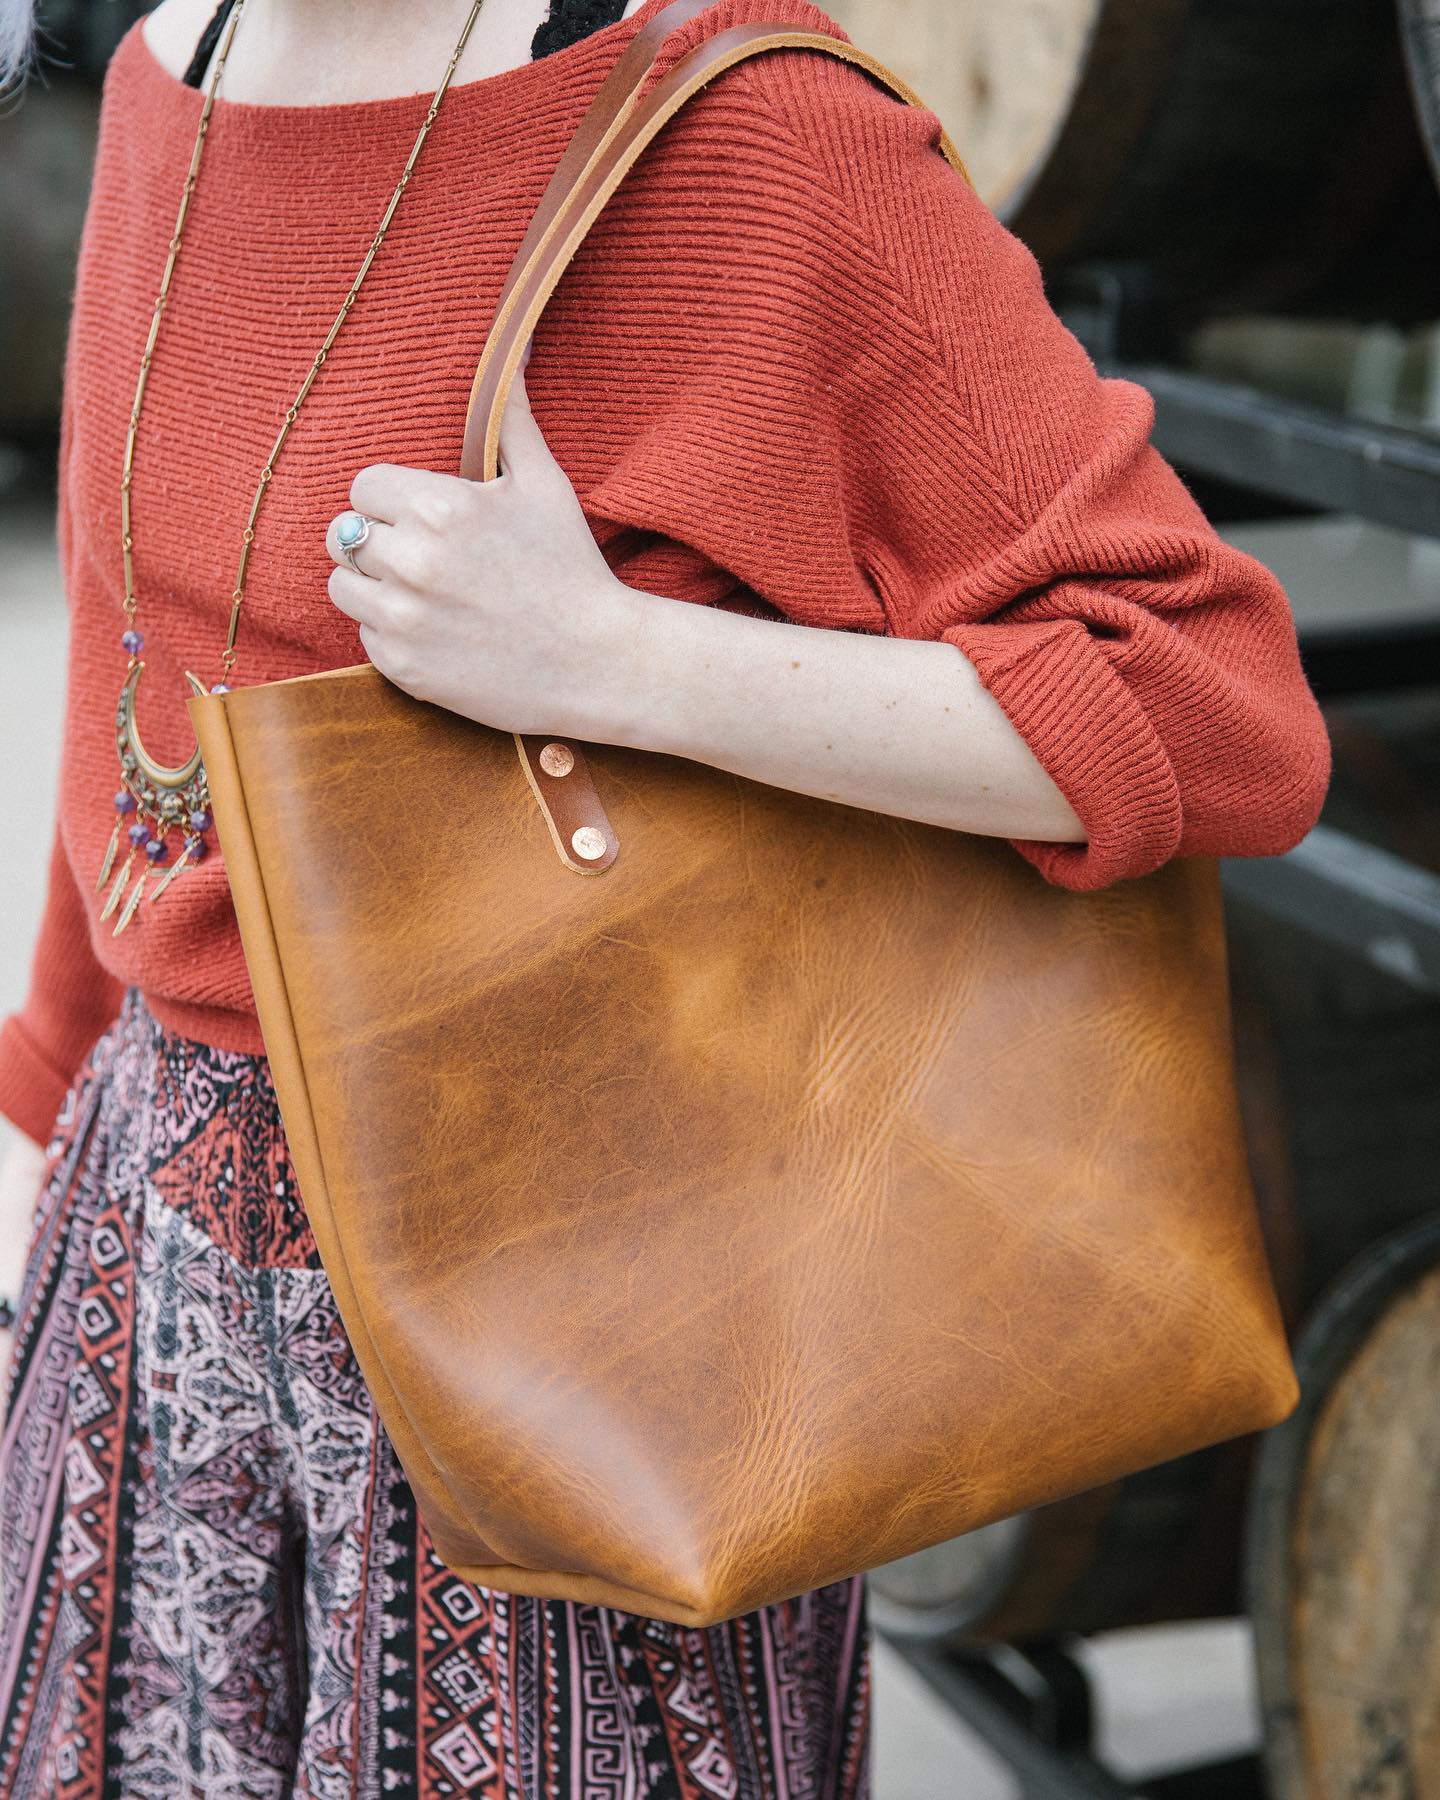 KMM & Co. Reviews: What Real Customers Think of our Leather Totes!